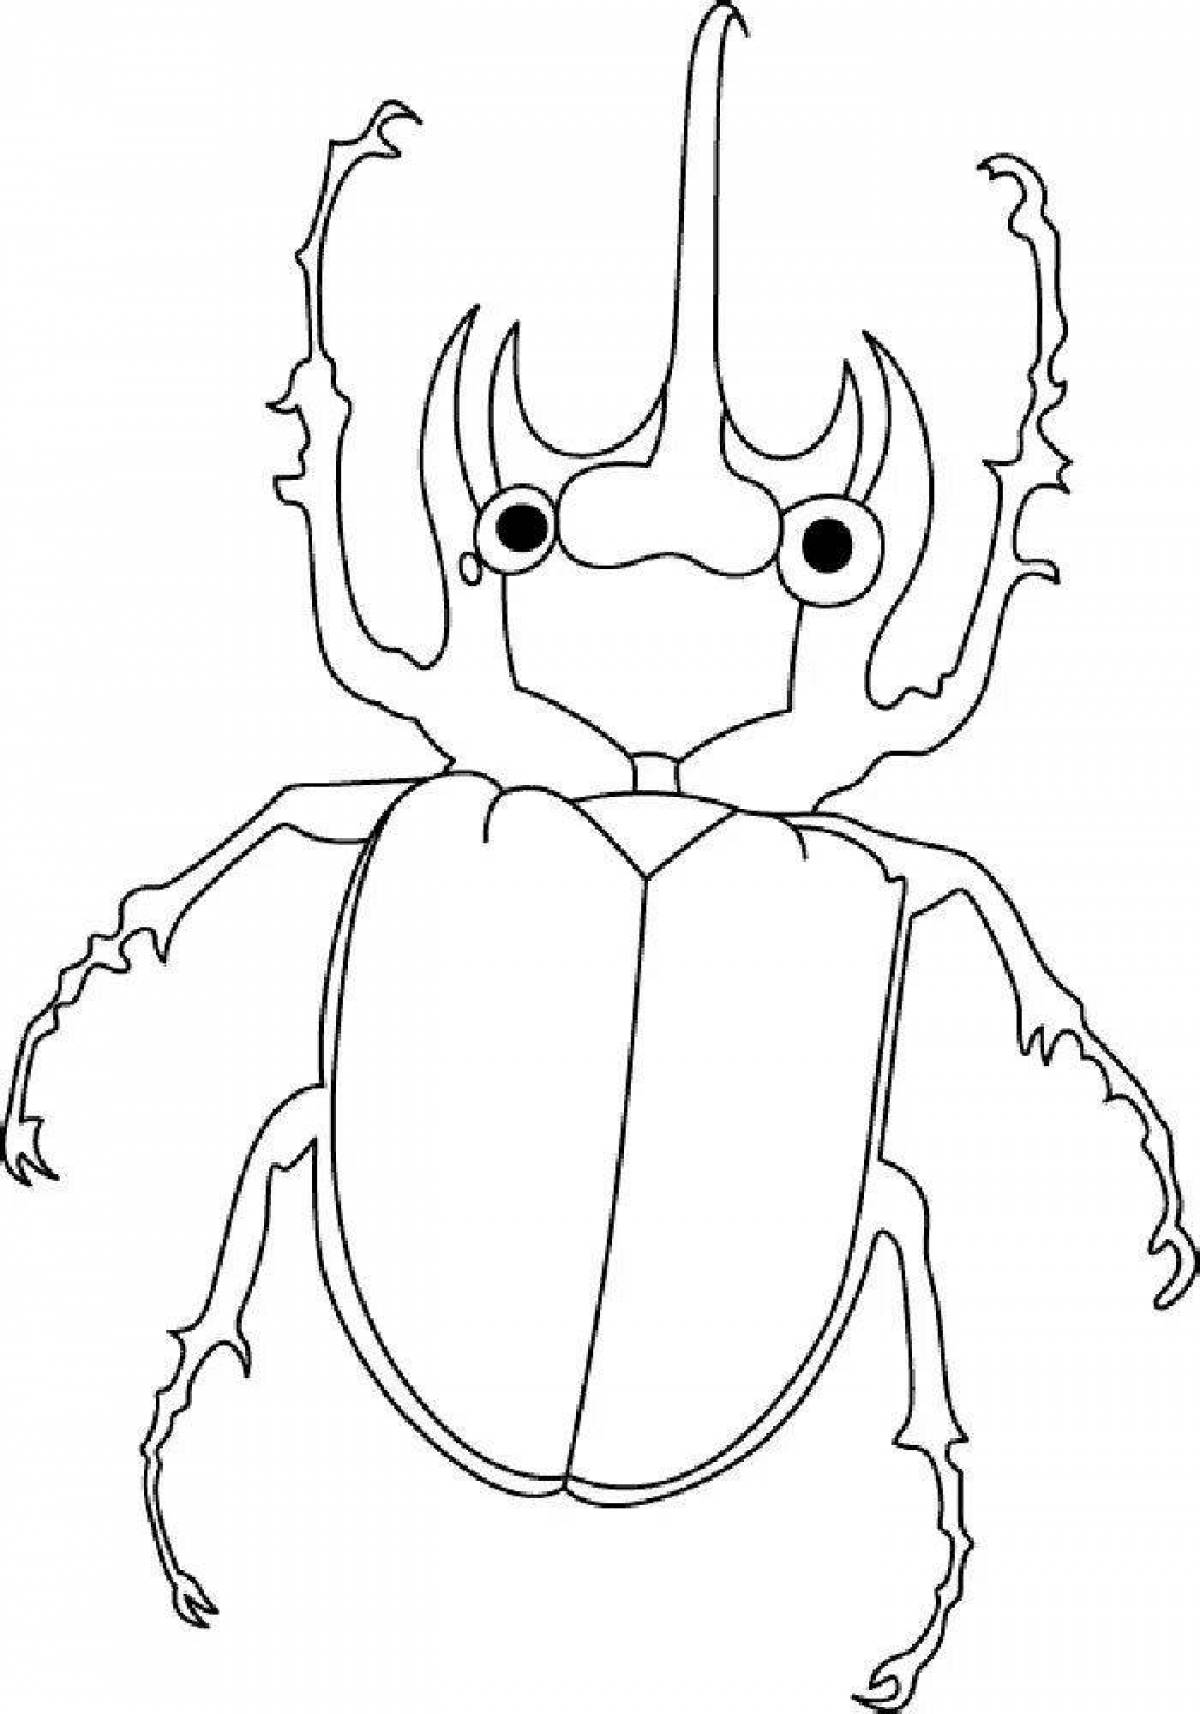 Stag beetle shining coloring book